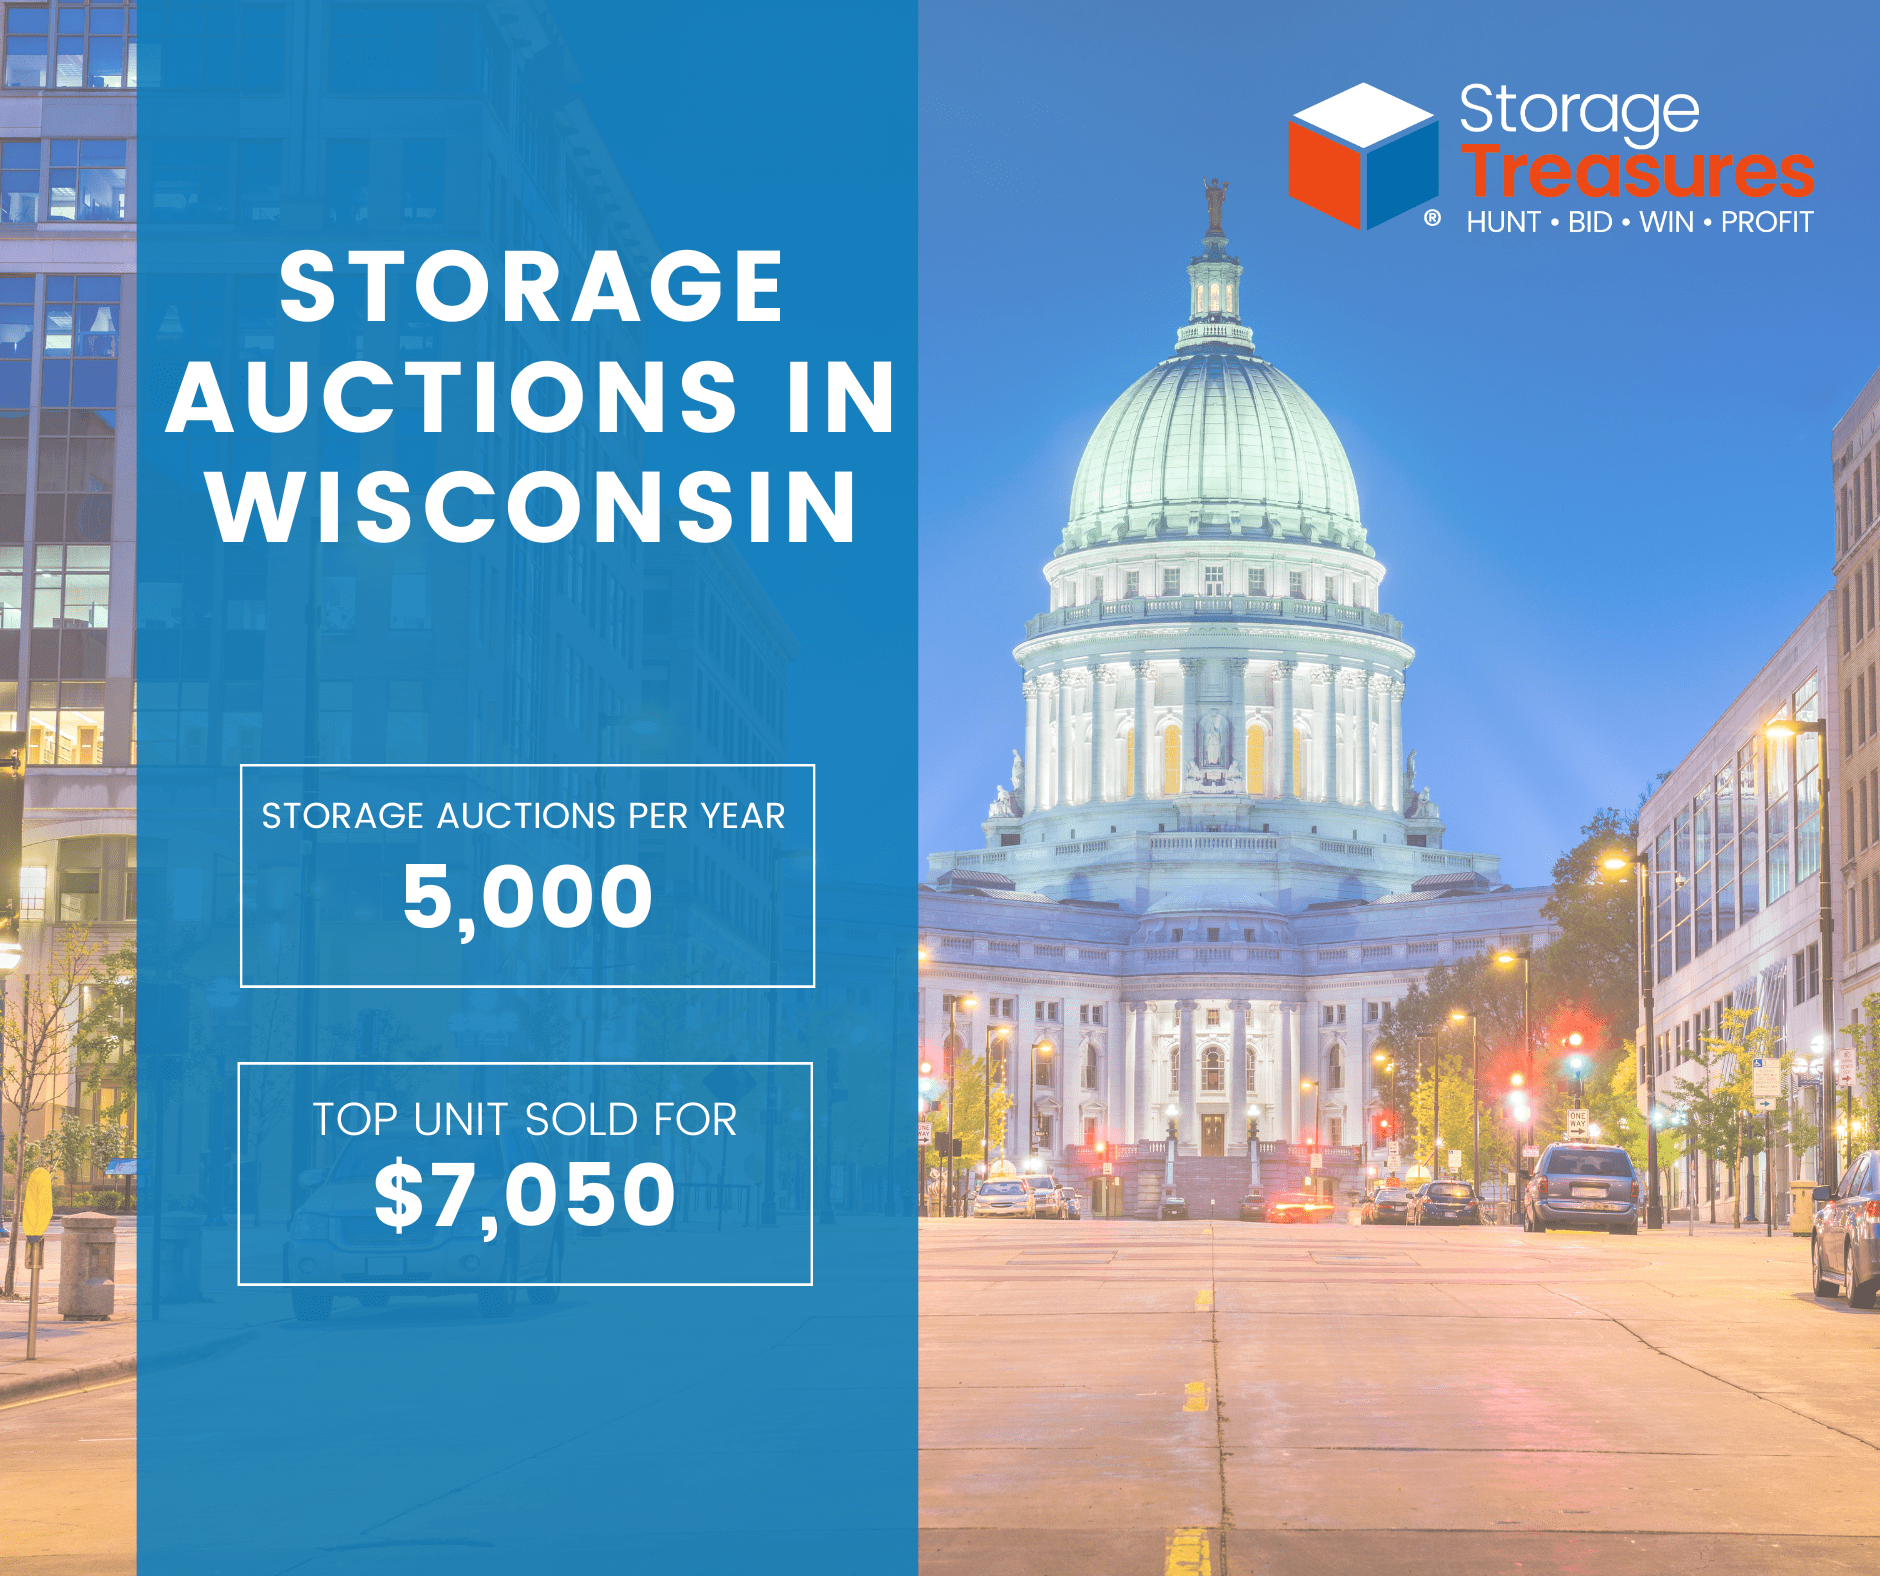 Learn about storage auctions in Wisconsin